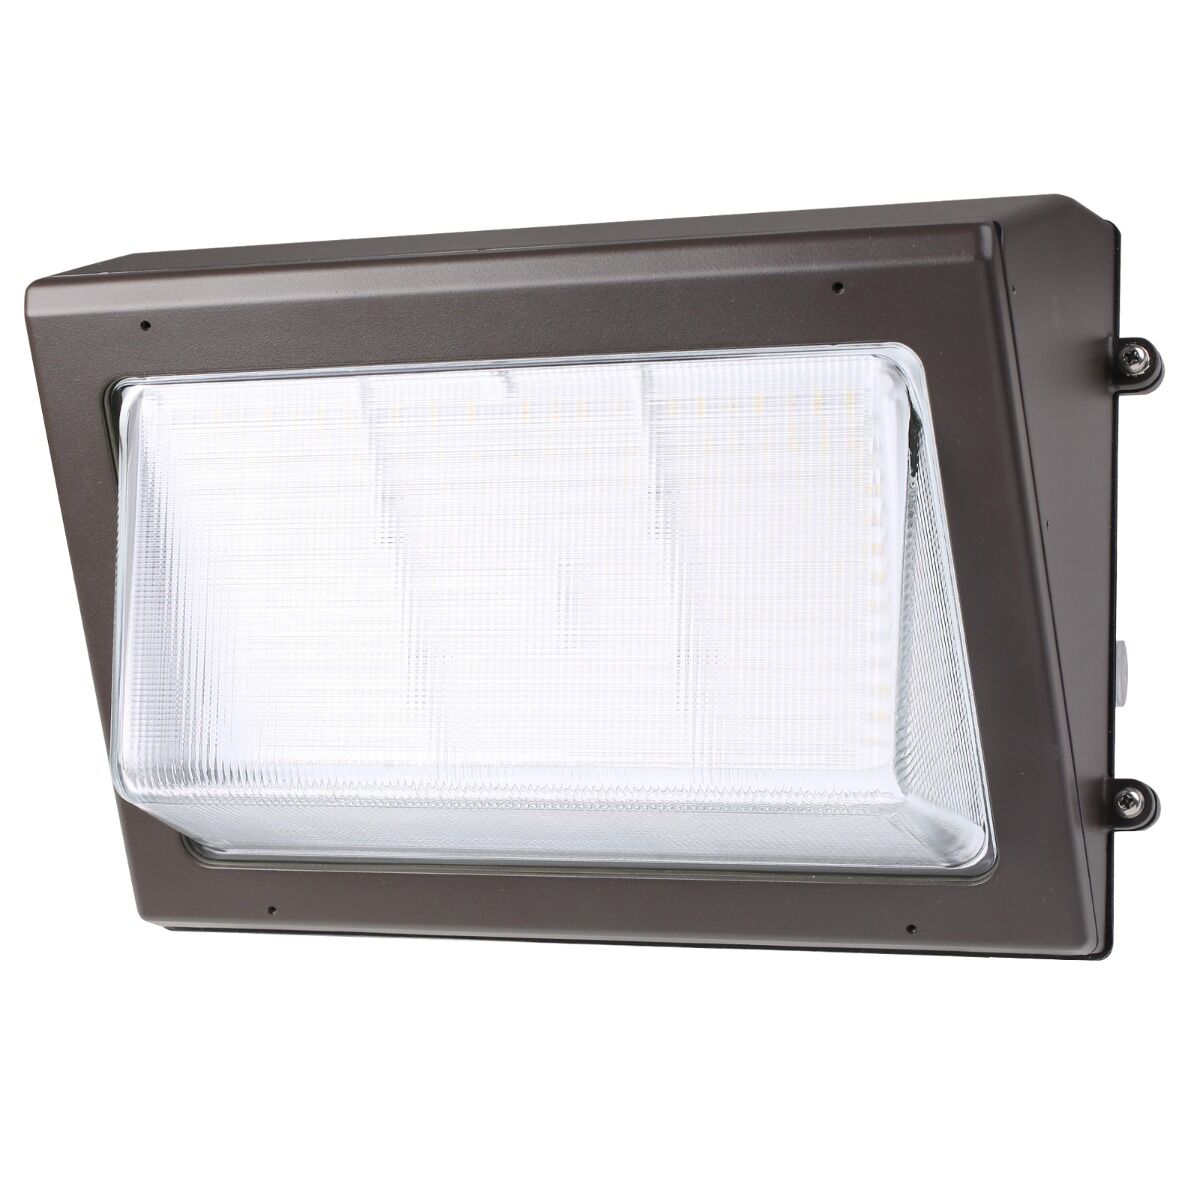 Image of 80W 5000K LED Wall Pack Light with Photocell, 11,600LM